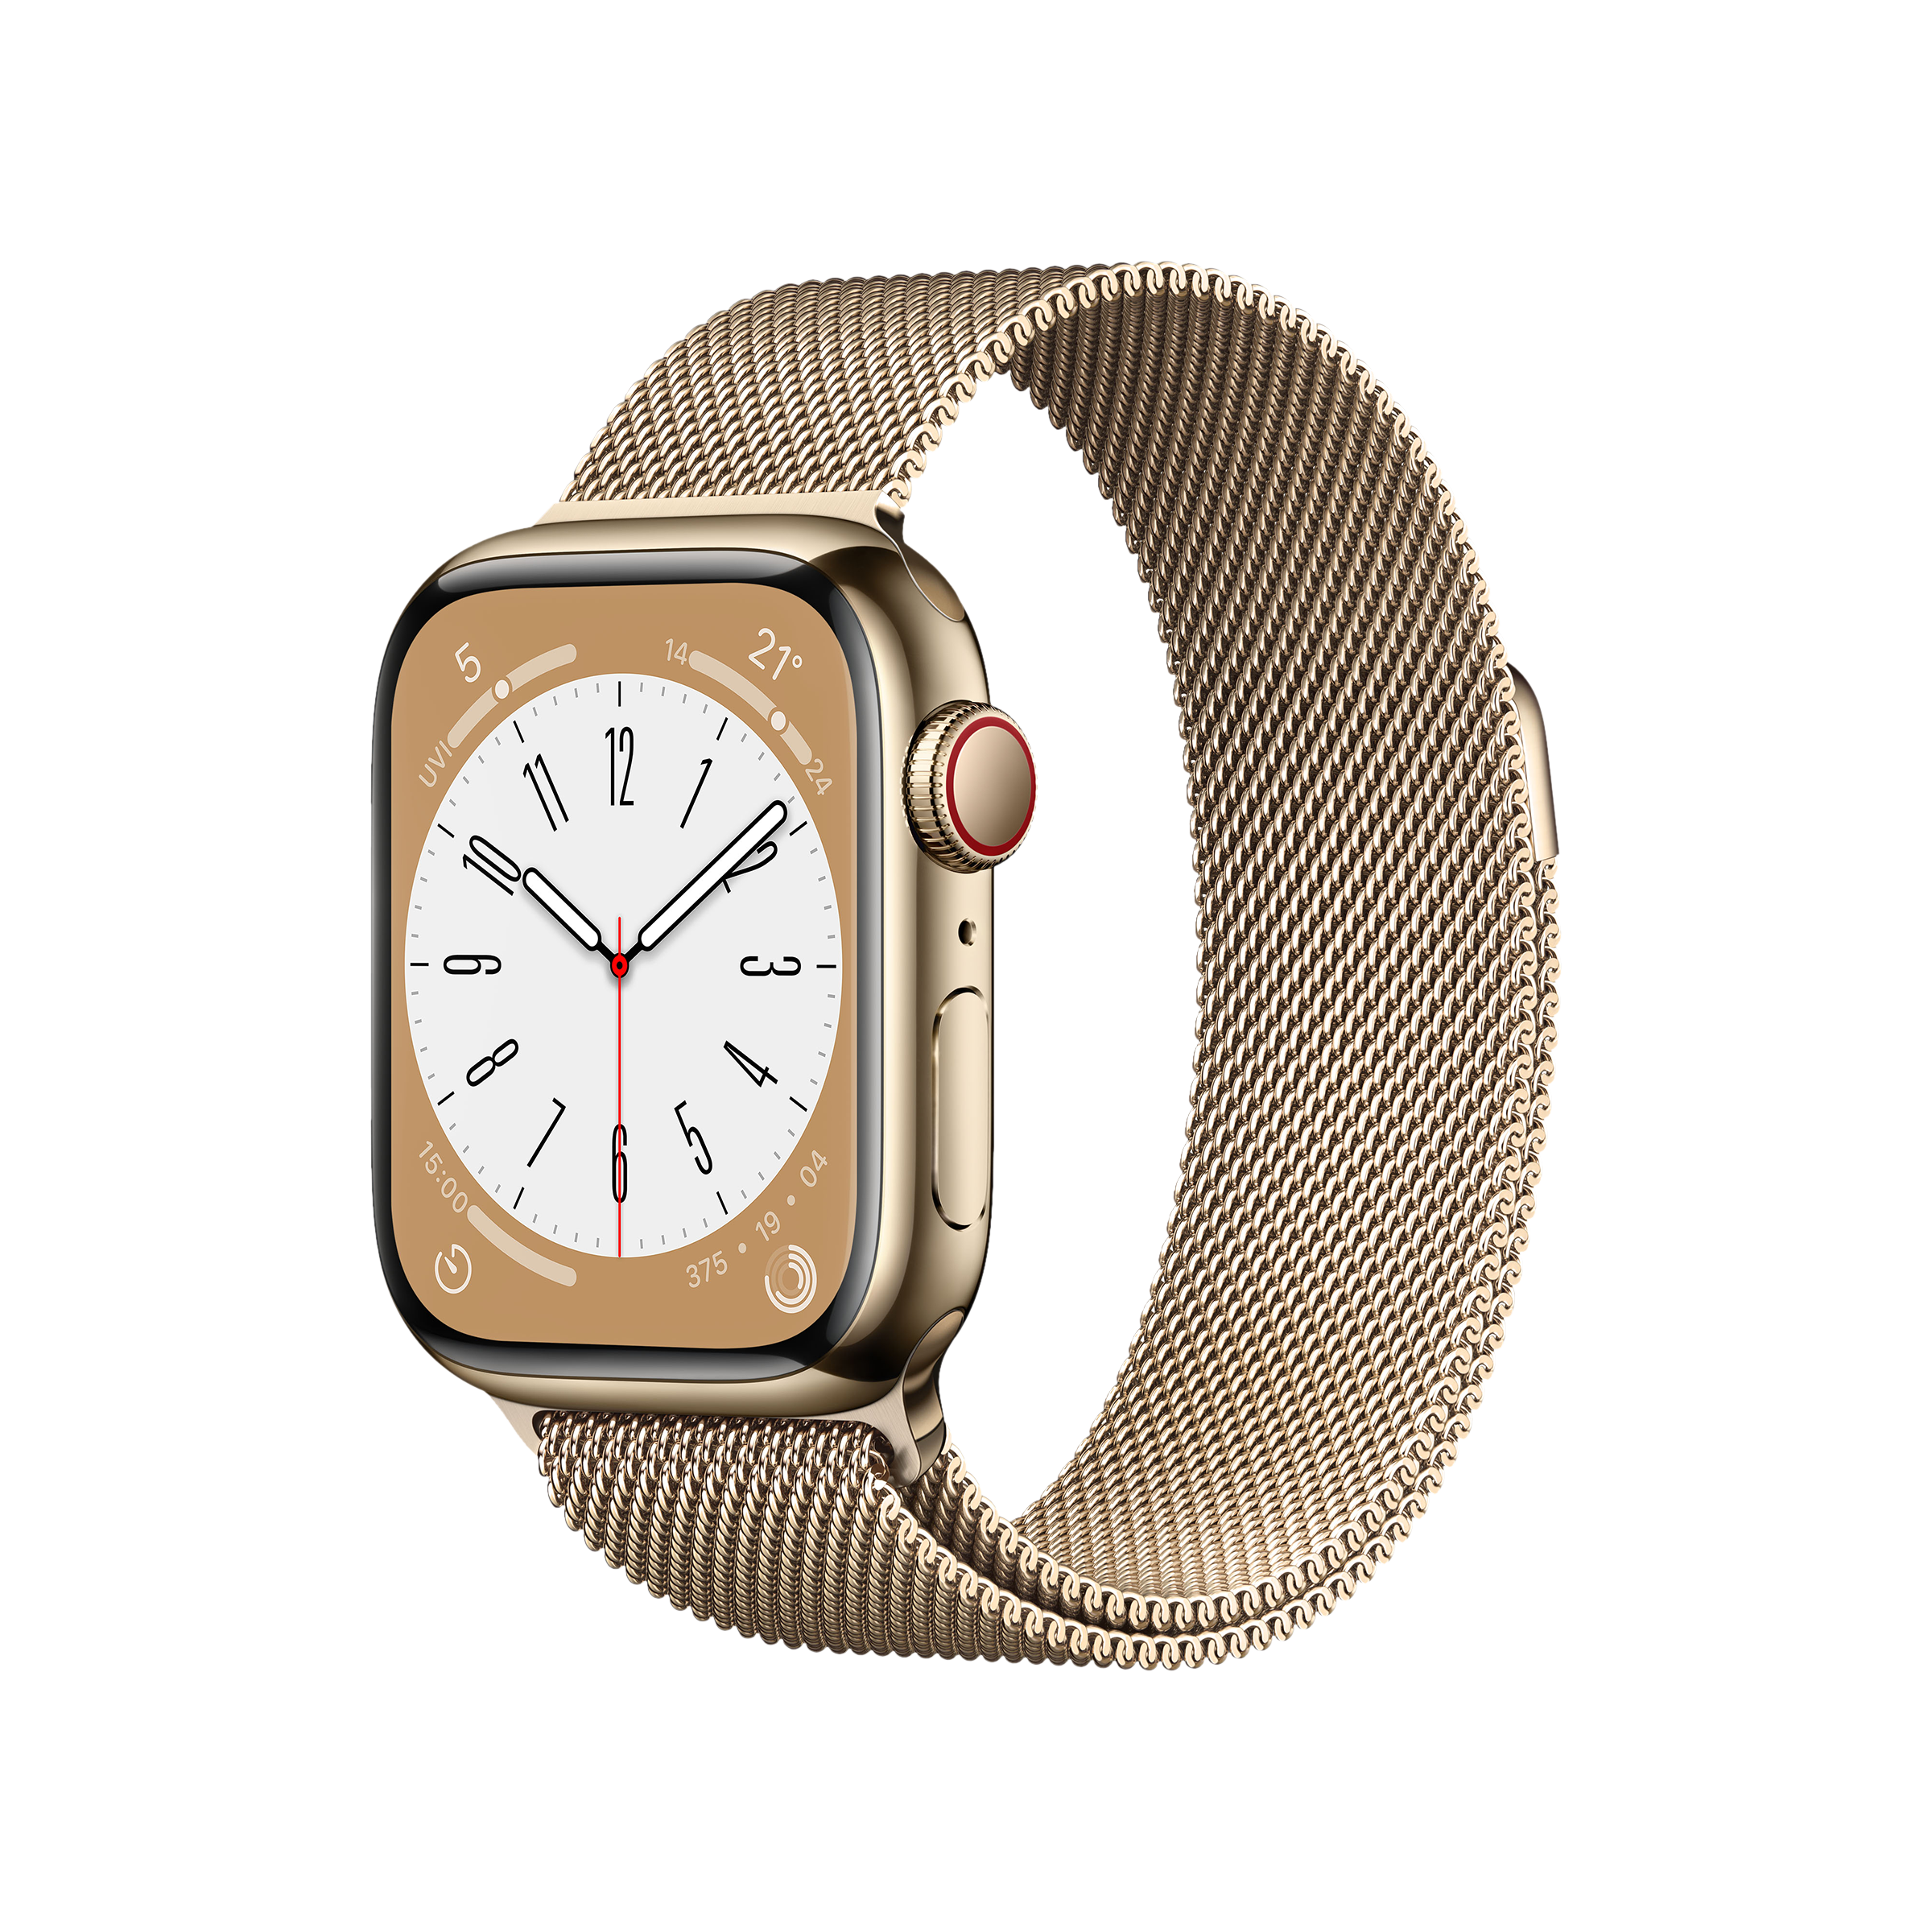 Apple watch gold stainless. Эпл вотч 8. Apple watch Series 8. Часы Apple watch 8 Stainless Steel. Apple watch Series 8 Steel.